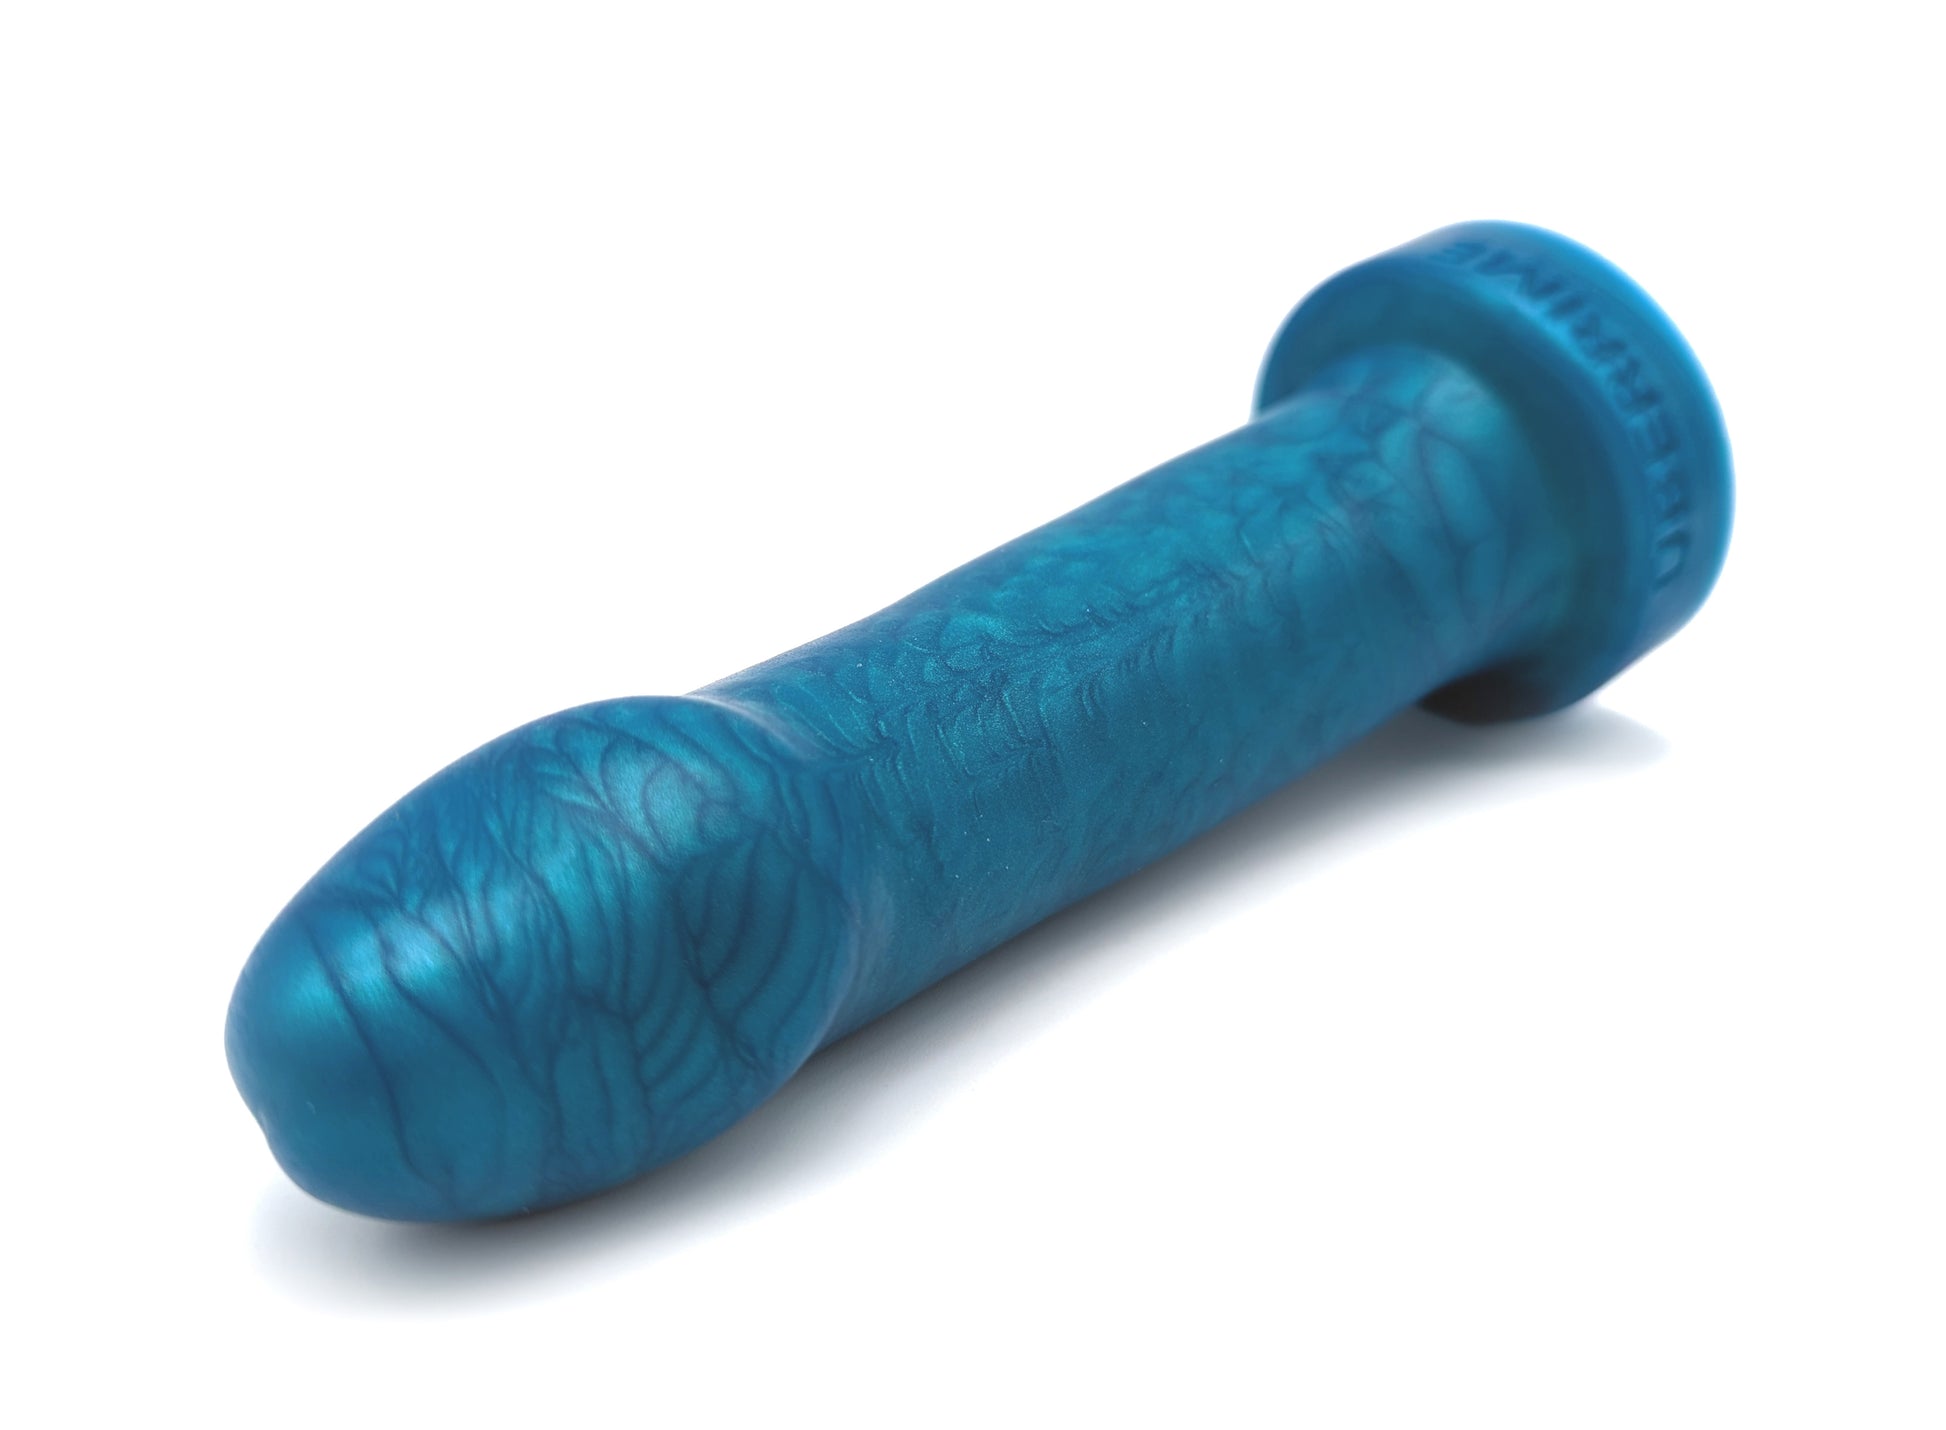 A beginner-friendly silicone dildo laying on its side. There’s a swirly effect to the silicone pigmentation. The toy’s flared base is round. 